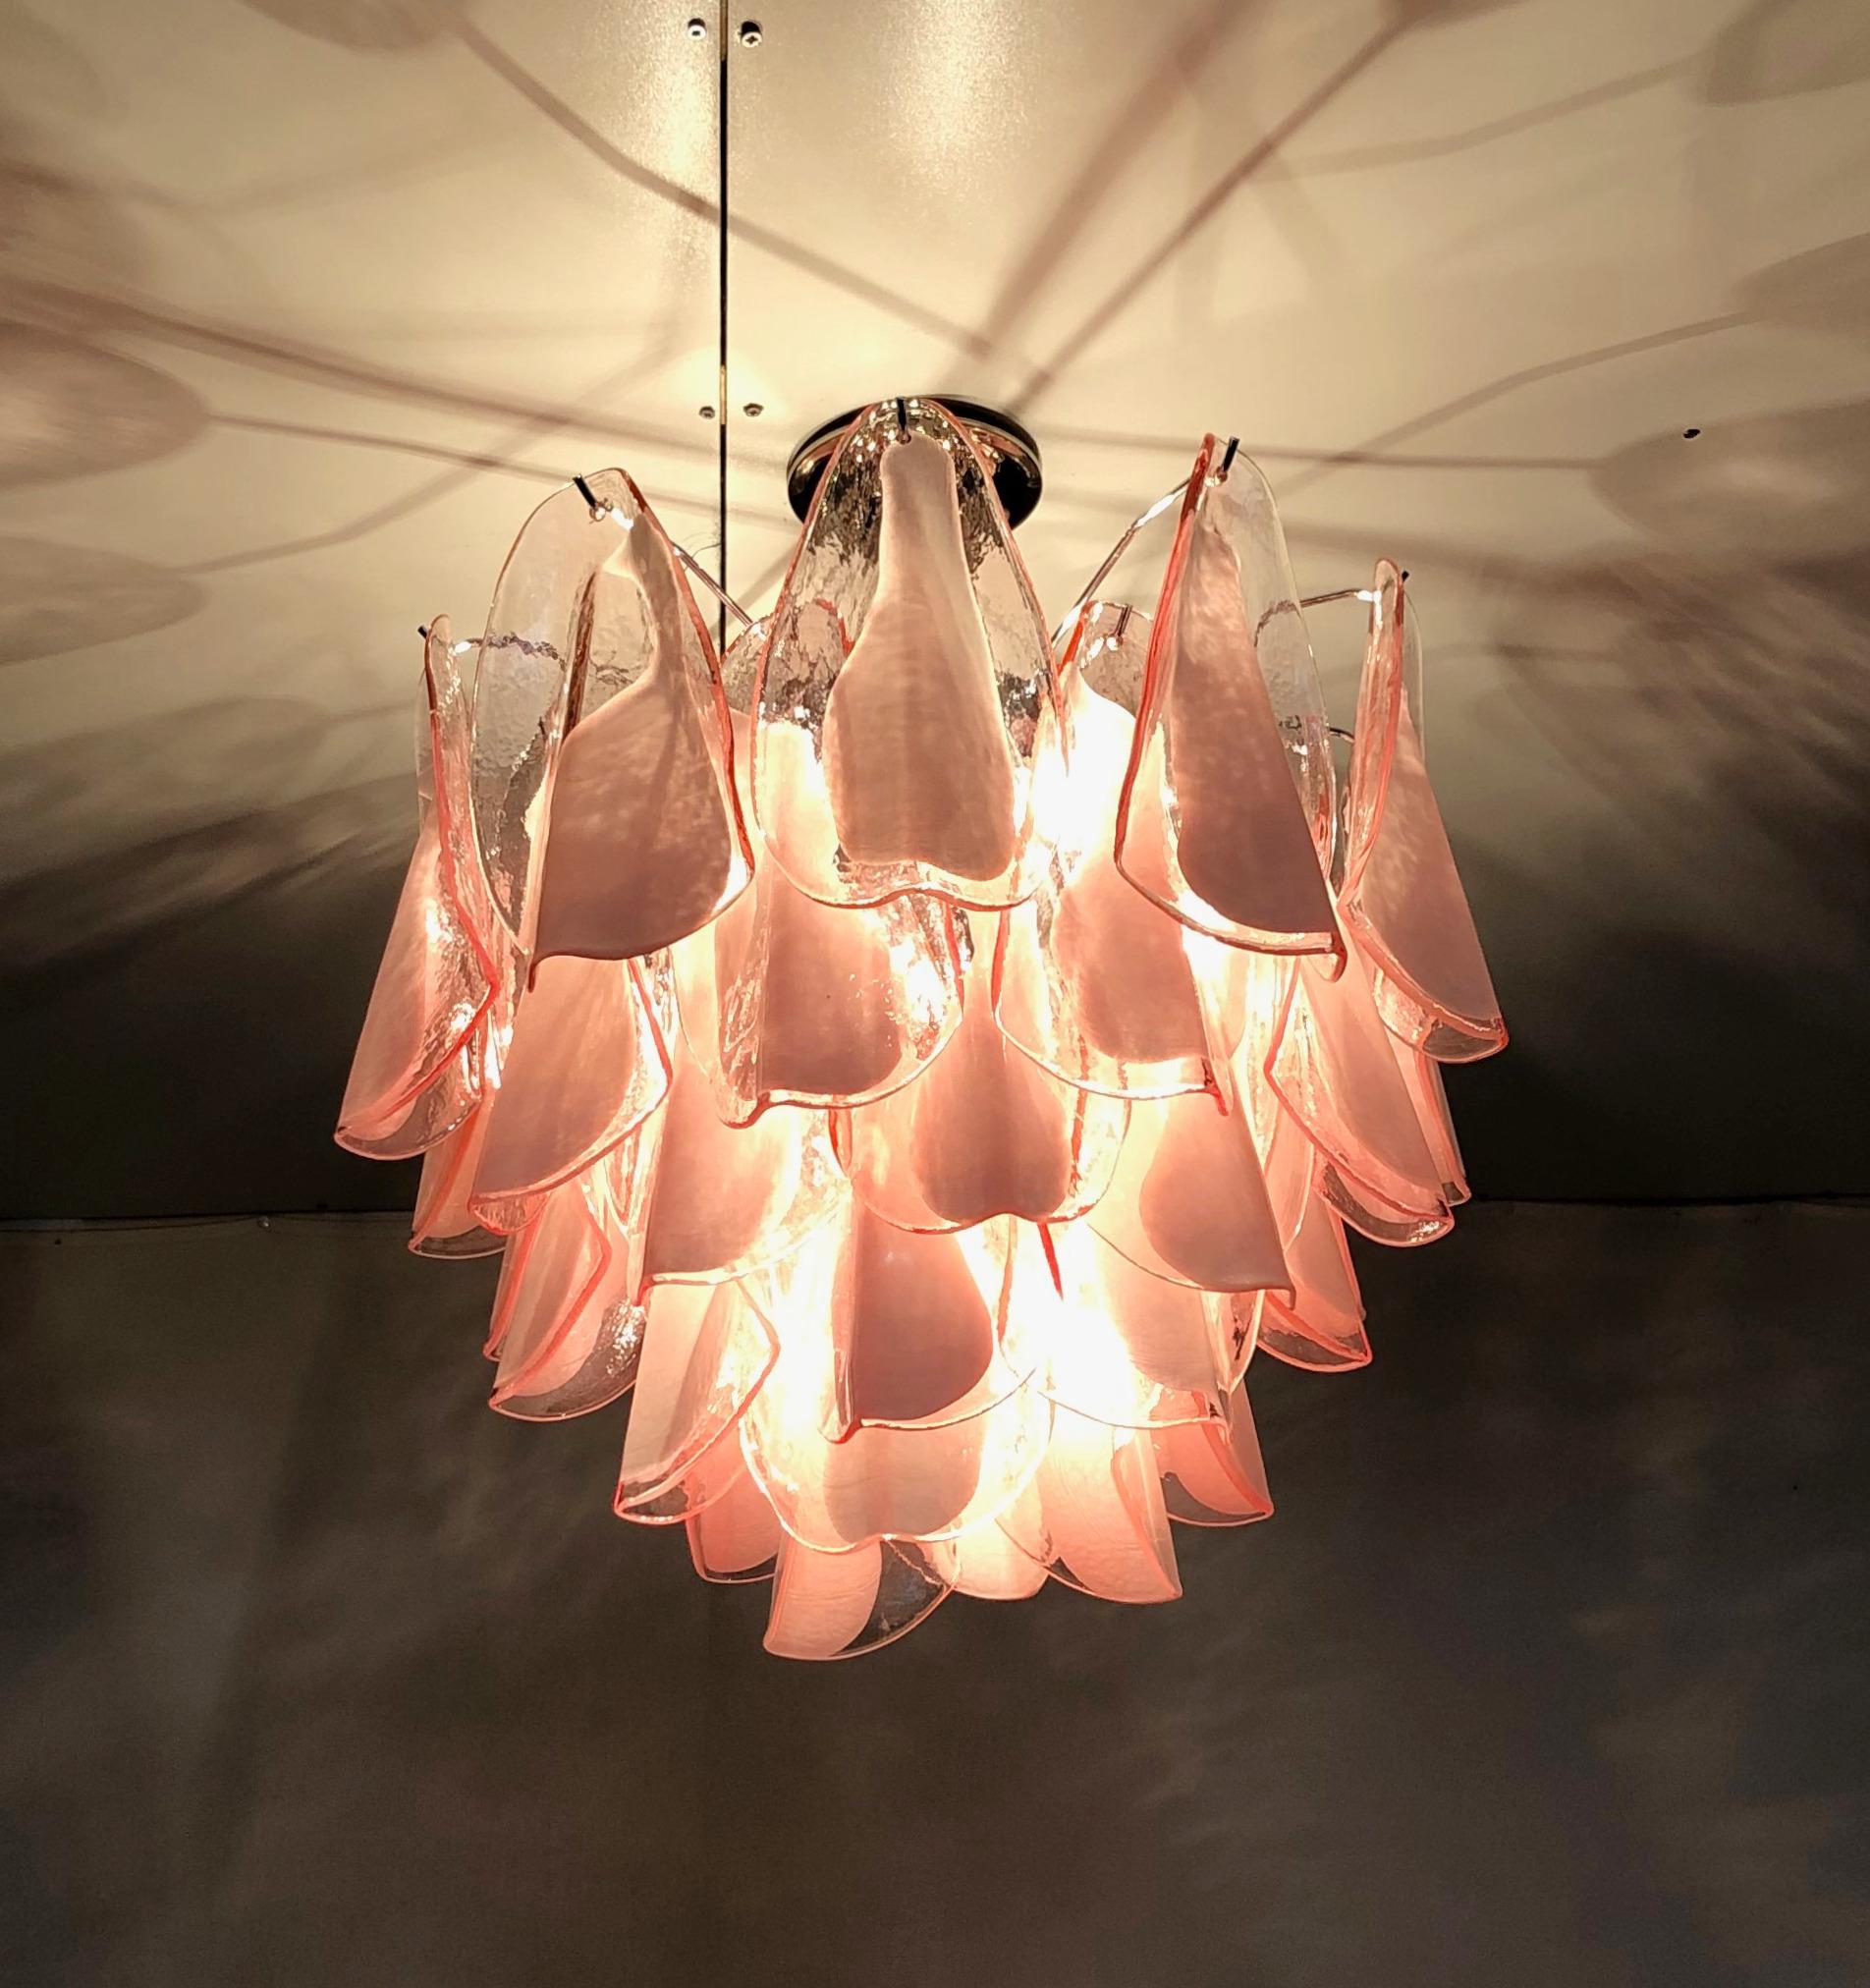 Italian chandelier shown with pink and milky white Murano glass petals, mounted on nickel finish frame / Designed by Fabio Bergomi for Fabio Ltd, inspired by Vistosi / Made in Italy
5 lights / E26 or E27 type / max 60W each
Measures: Diameter: 23.5